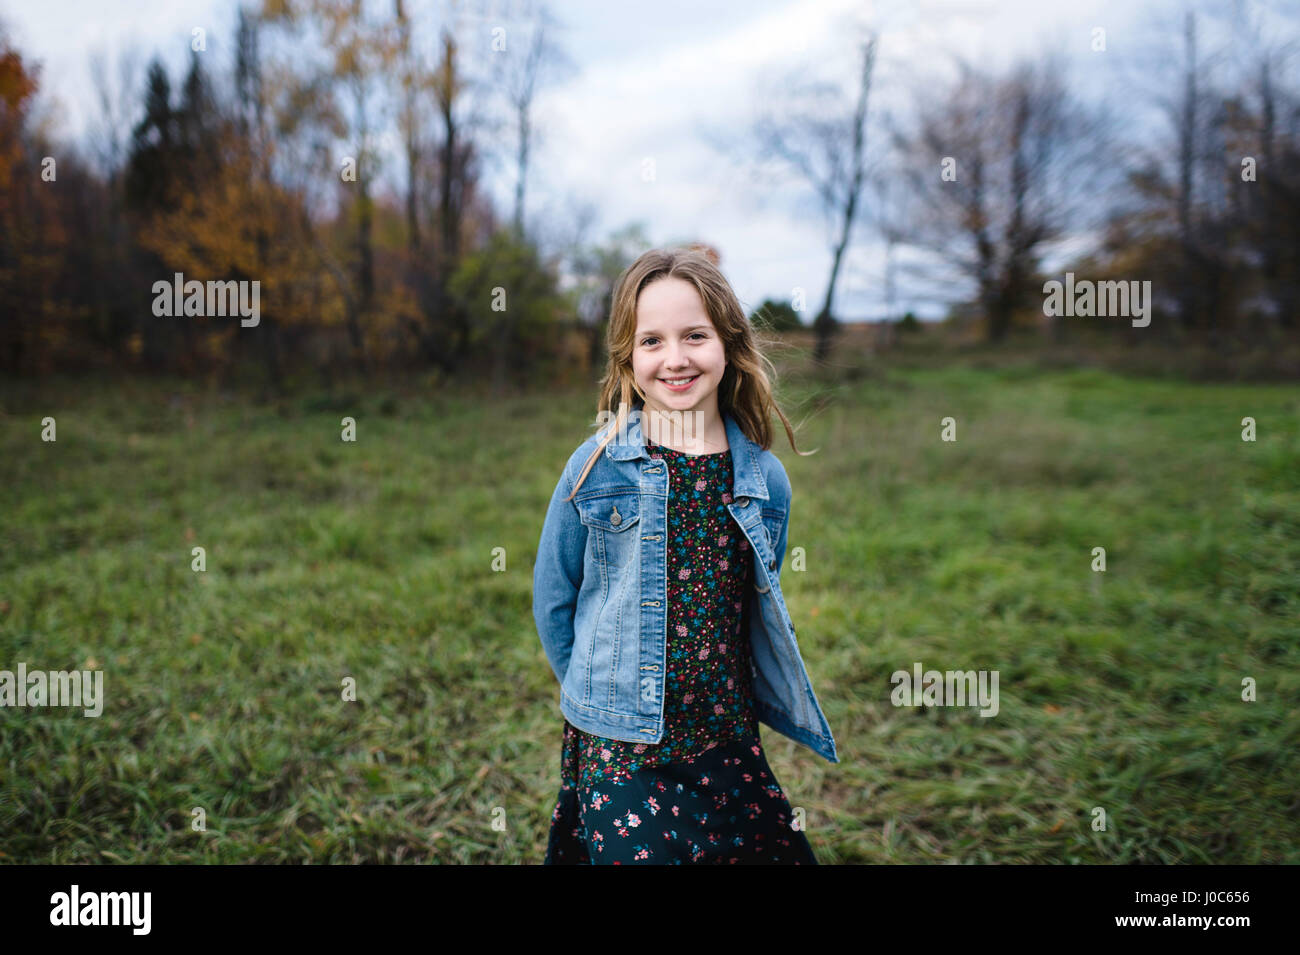 Young girl smiling in field in denim jacket, Lakefield, Ontario, Canada Stock Photo